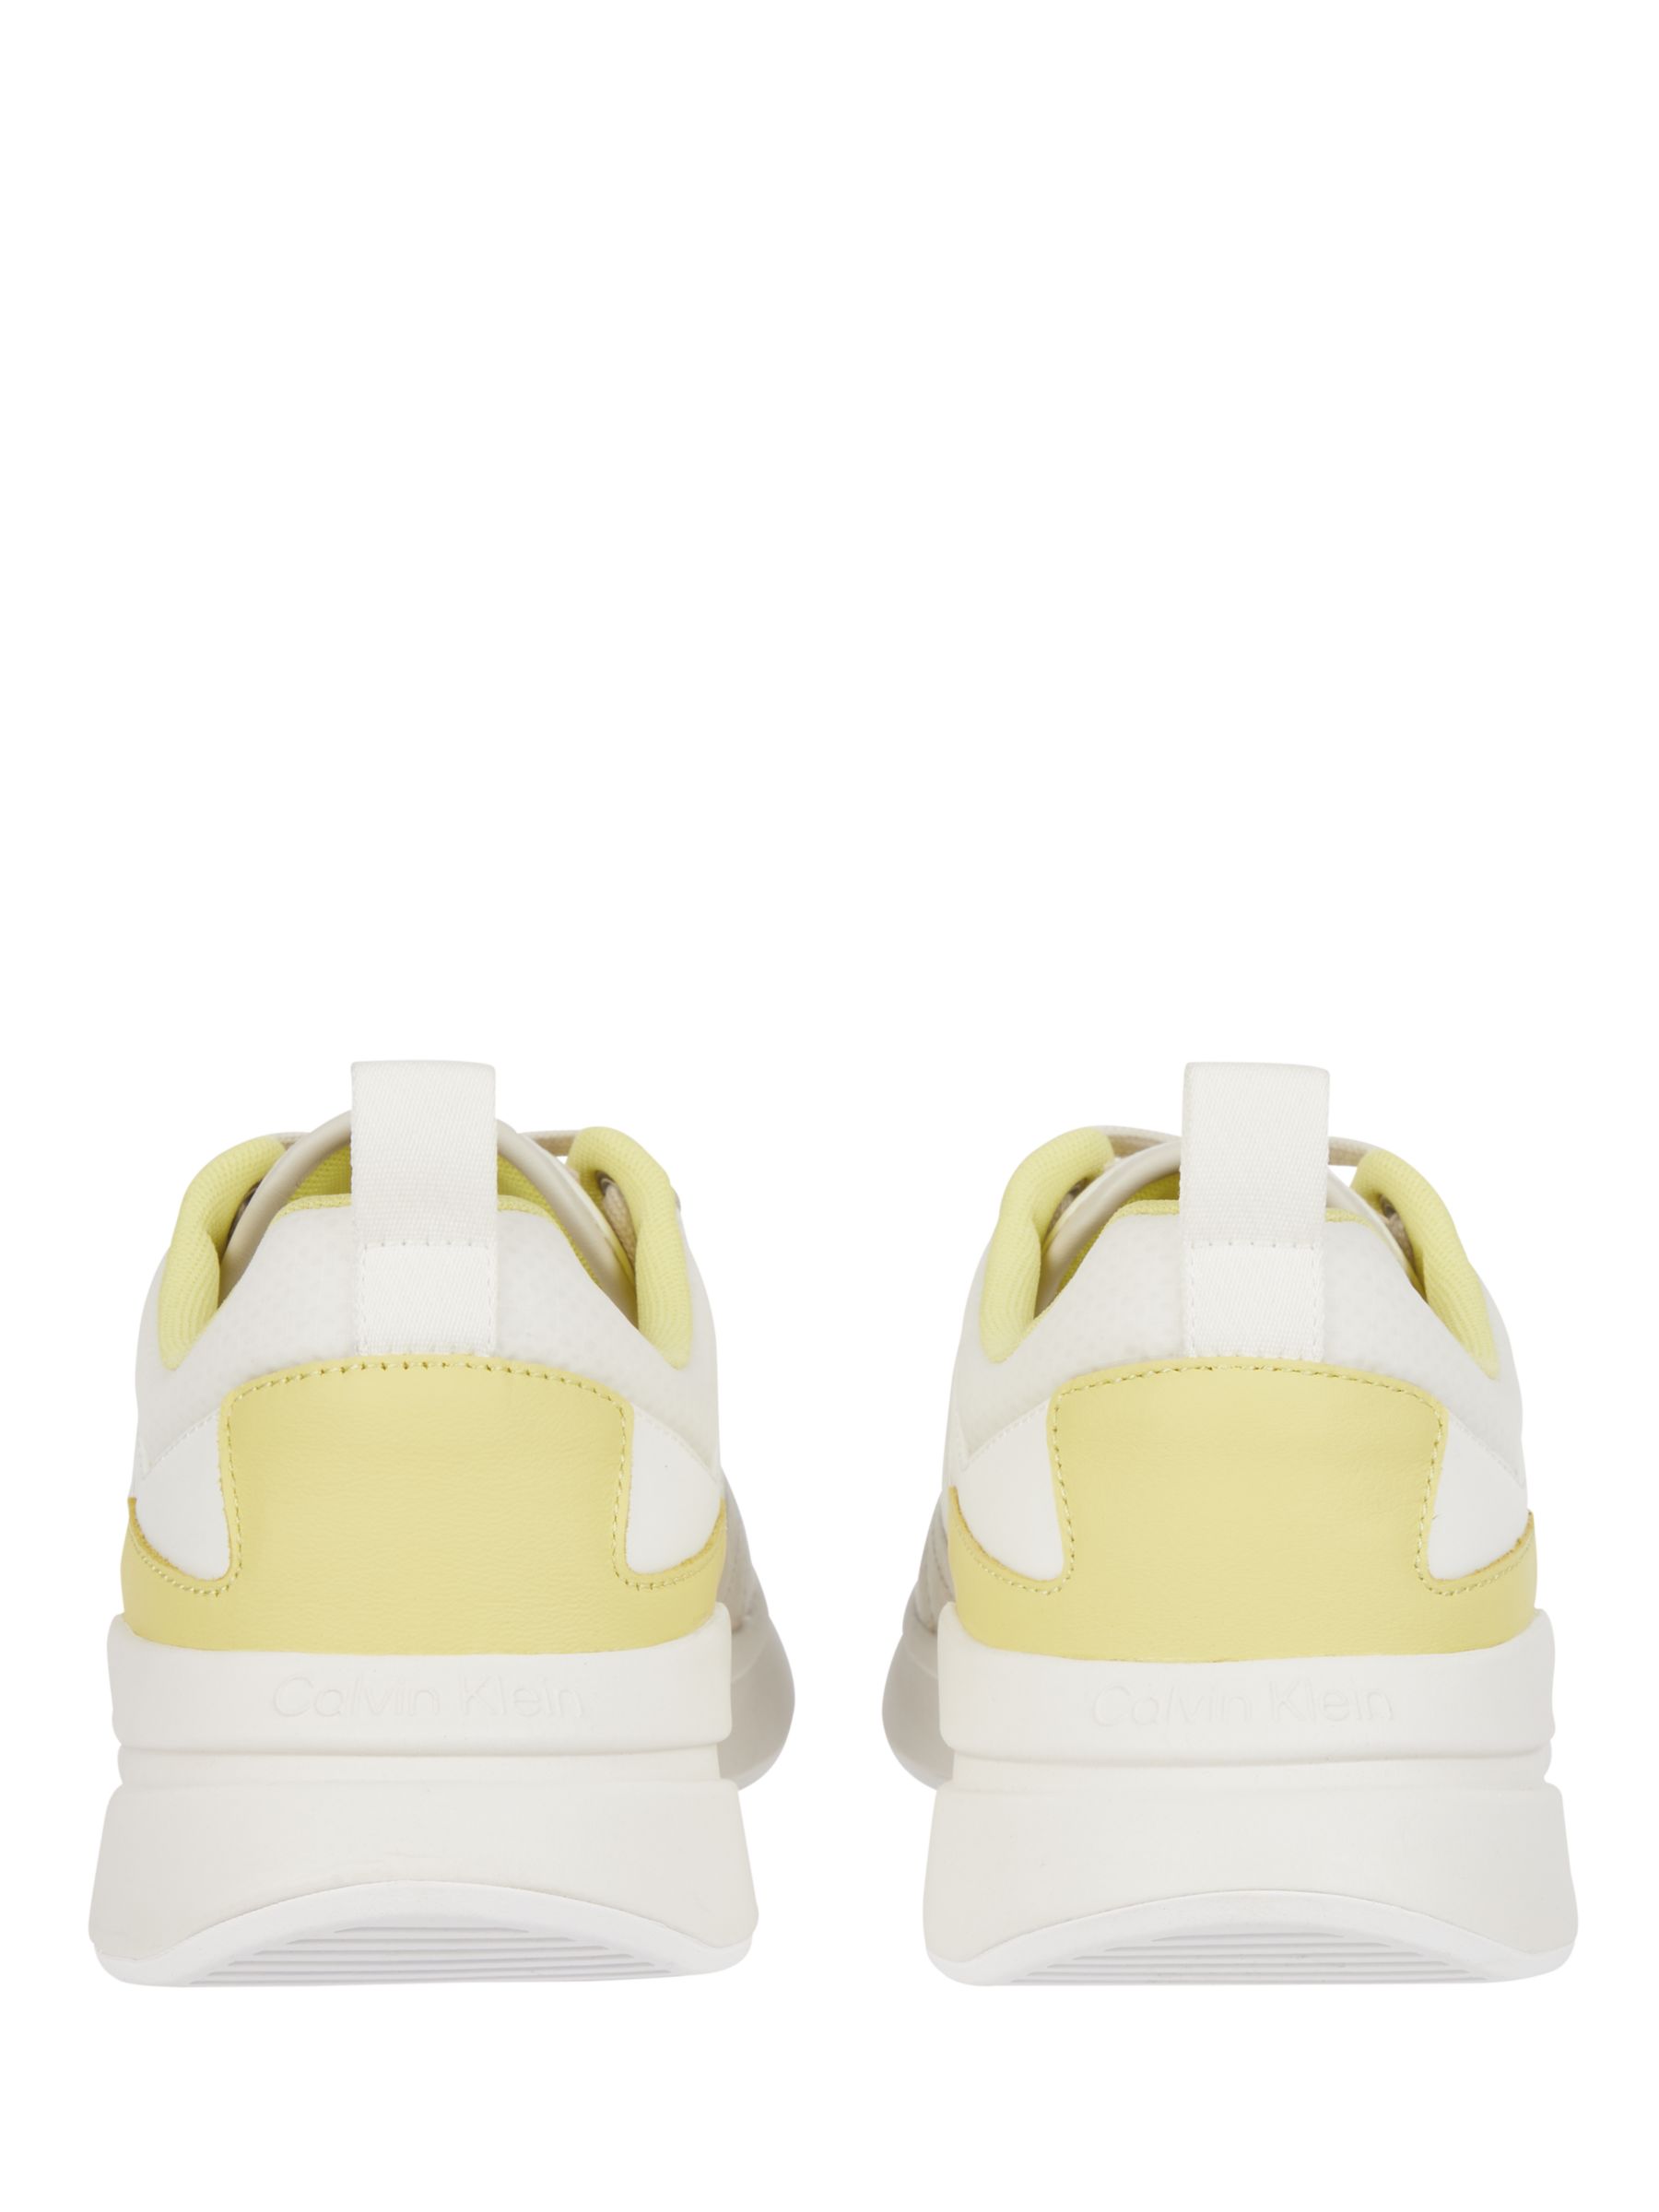 Buy Calvin Klein Leather Low Top Chunky Heel Trainers, Marshmallow/Acacia Online at johnlewis.com